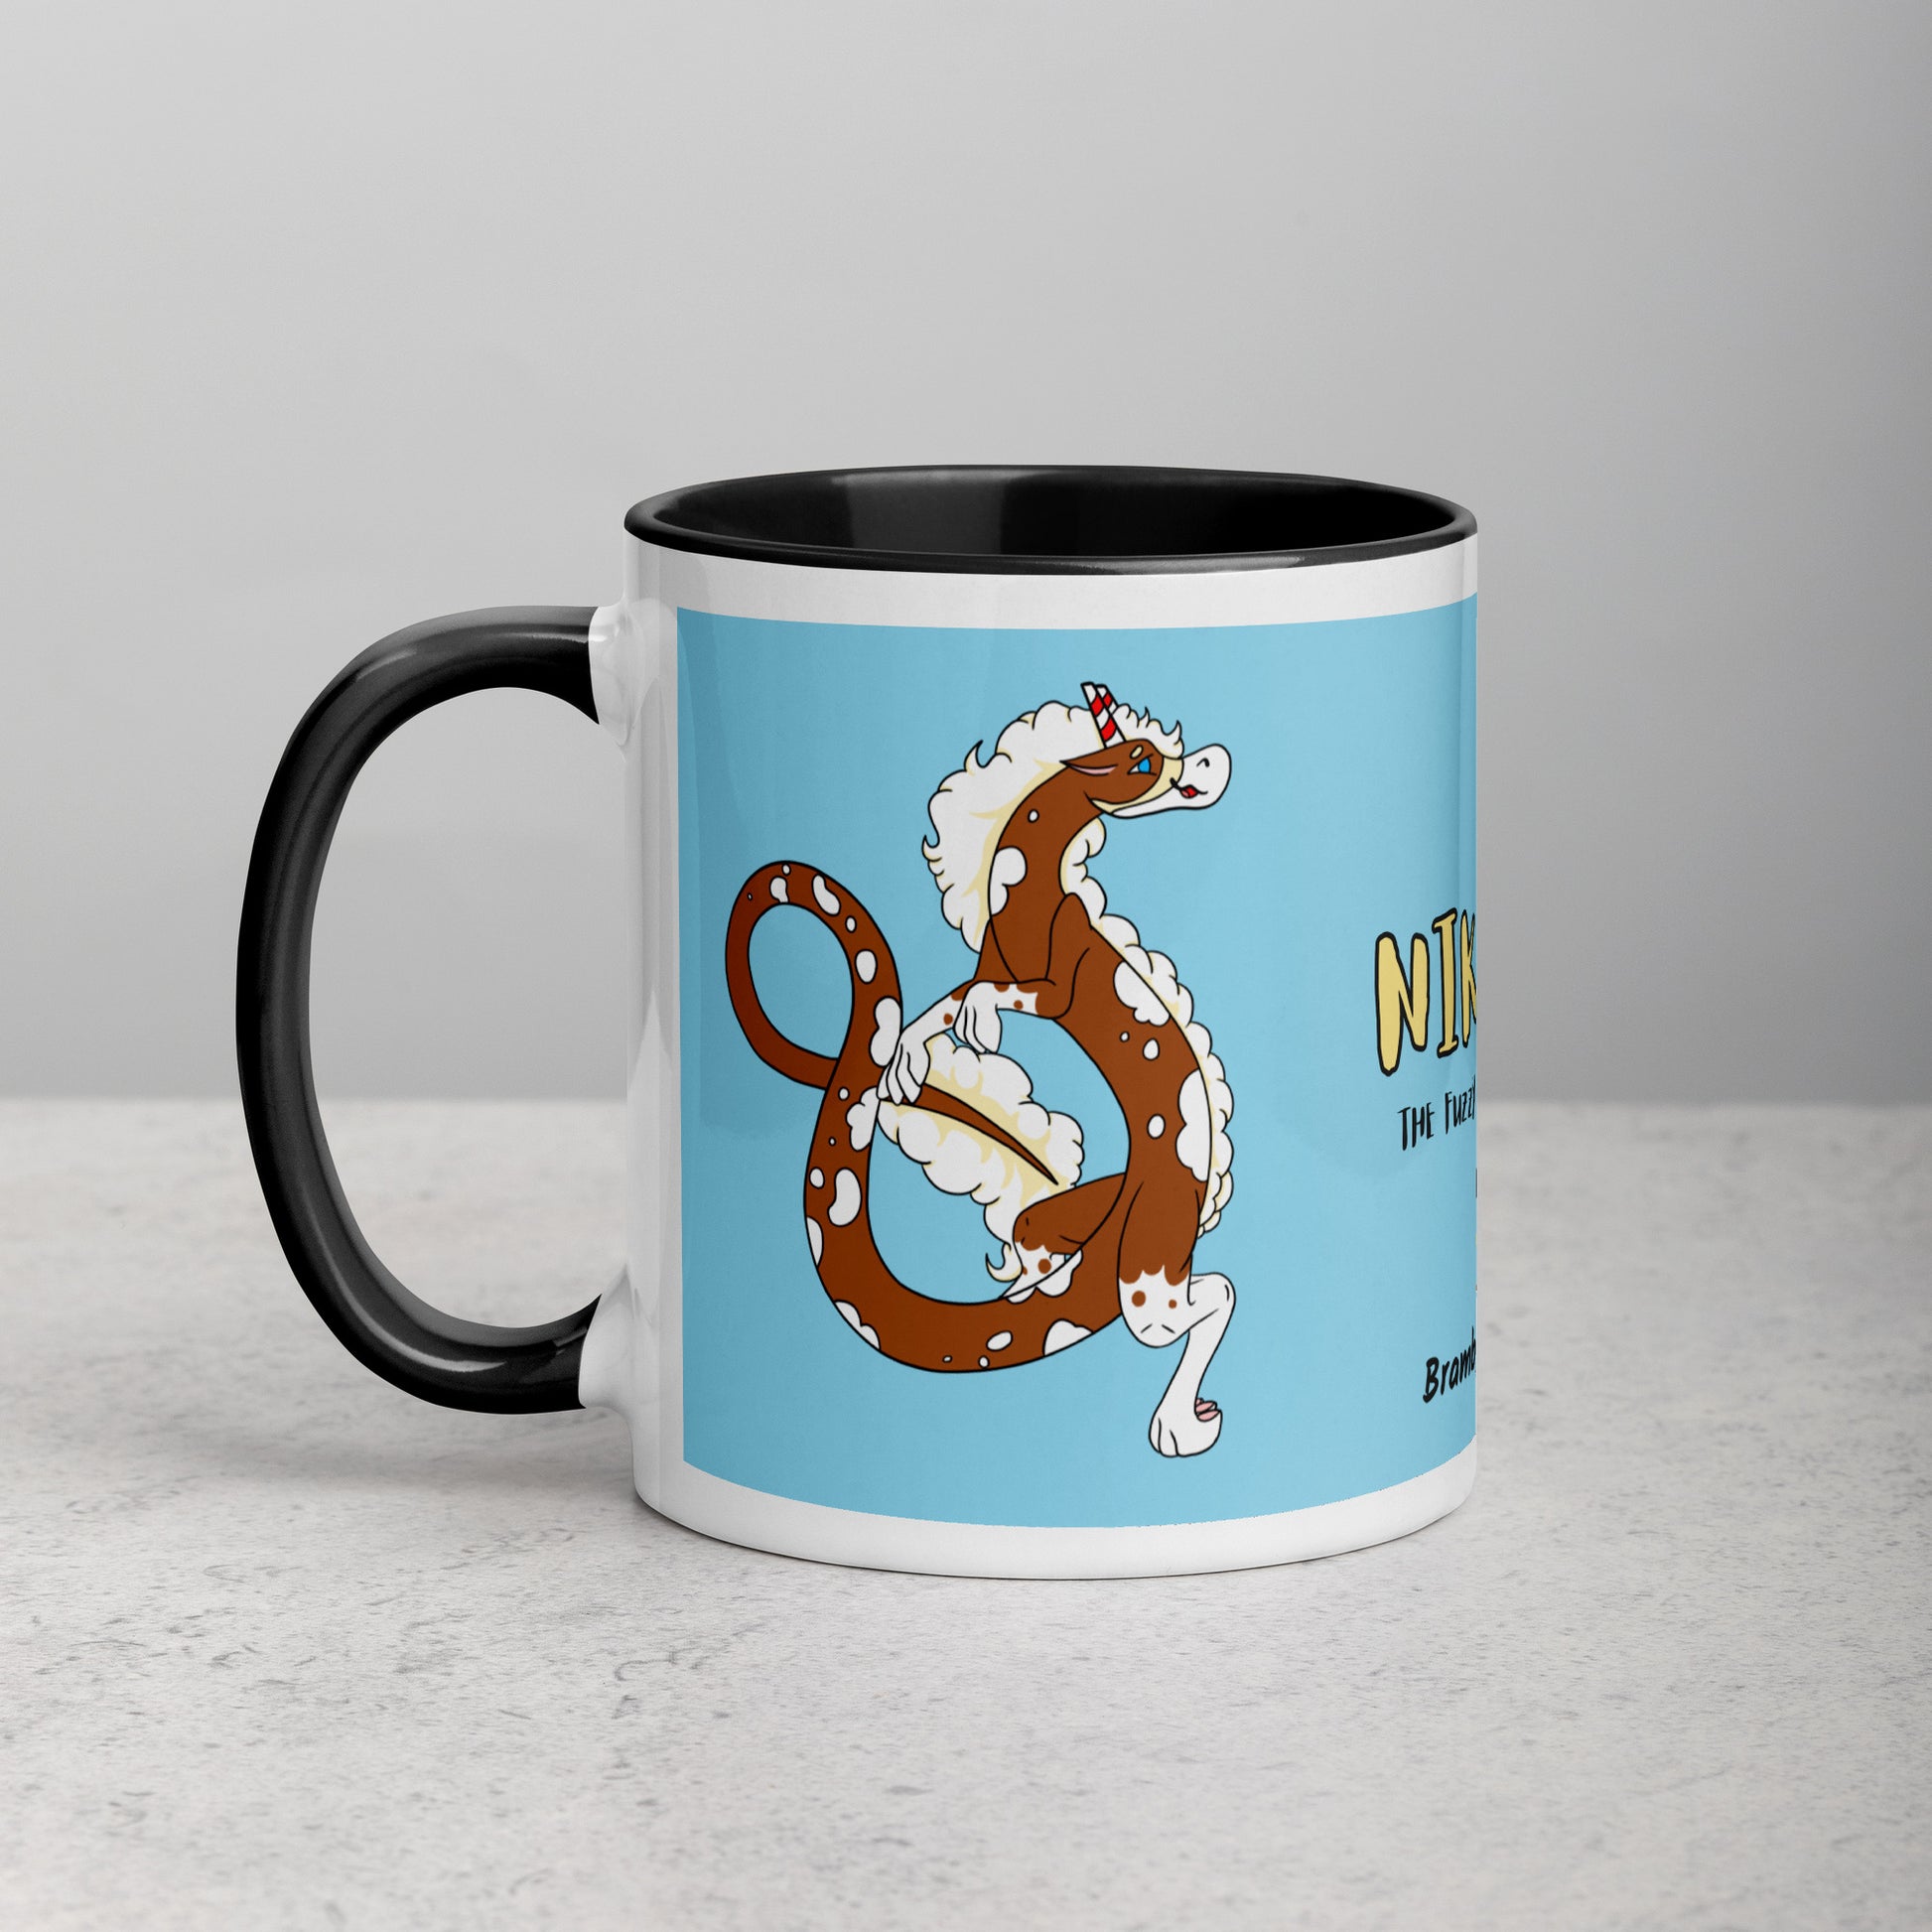 11 ounce ceramic mug with black handle, rim and inside color. Features double-sided image of Nikolai the Fuzzy Noodle Root beer float dragon on a light blue background. Mug is microwave and dishwasher safe.